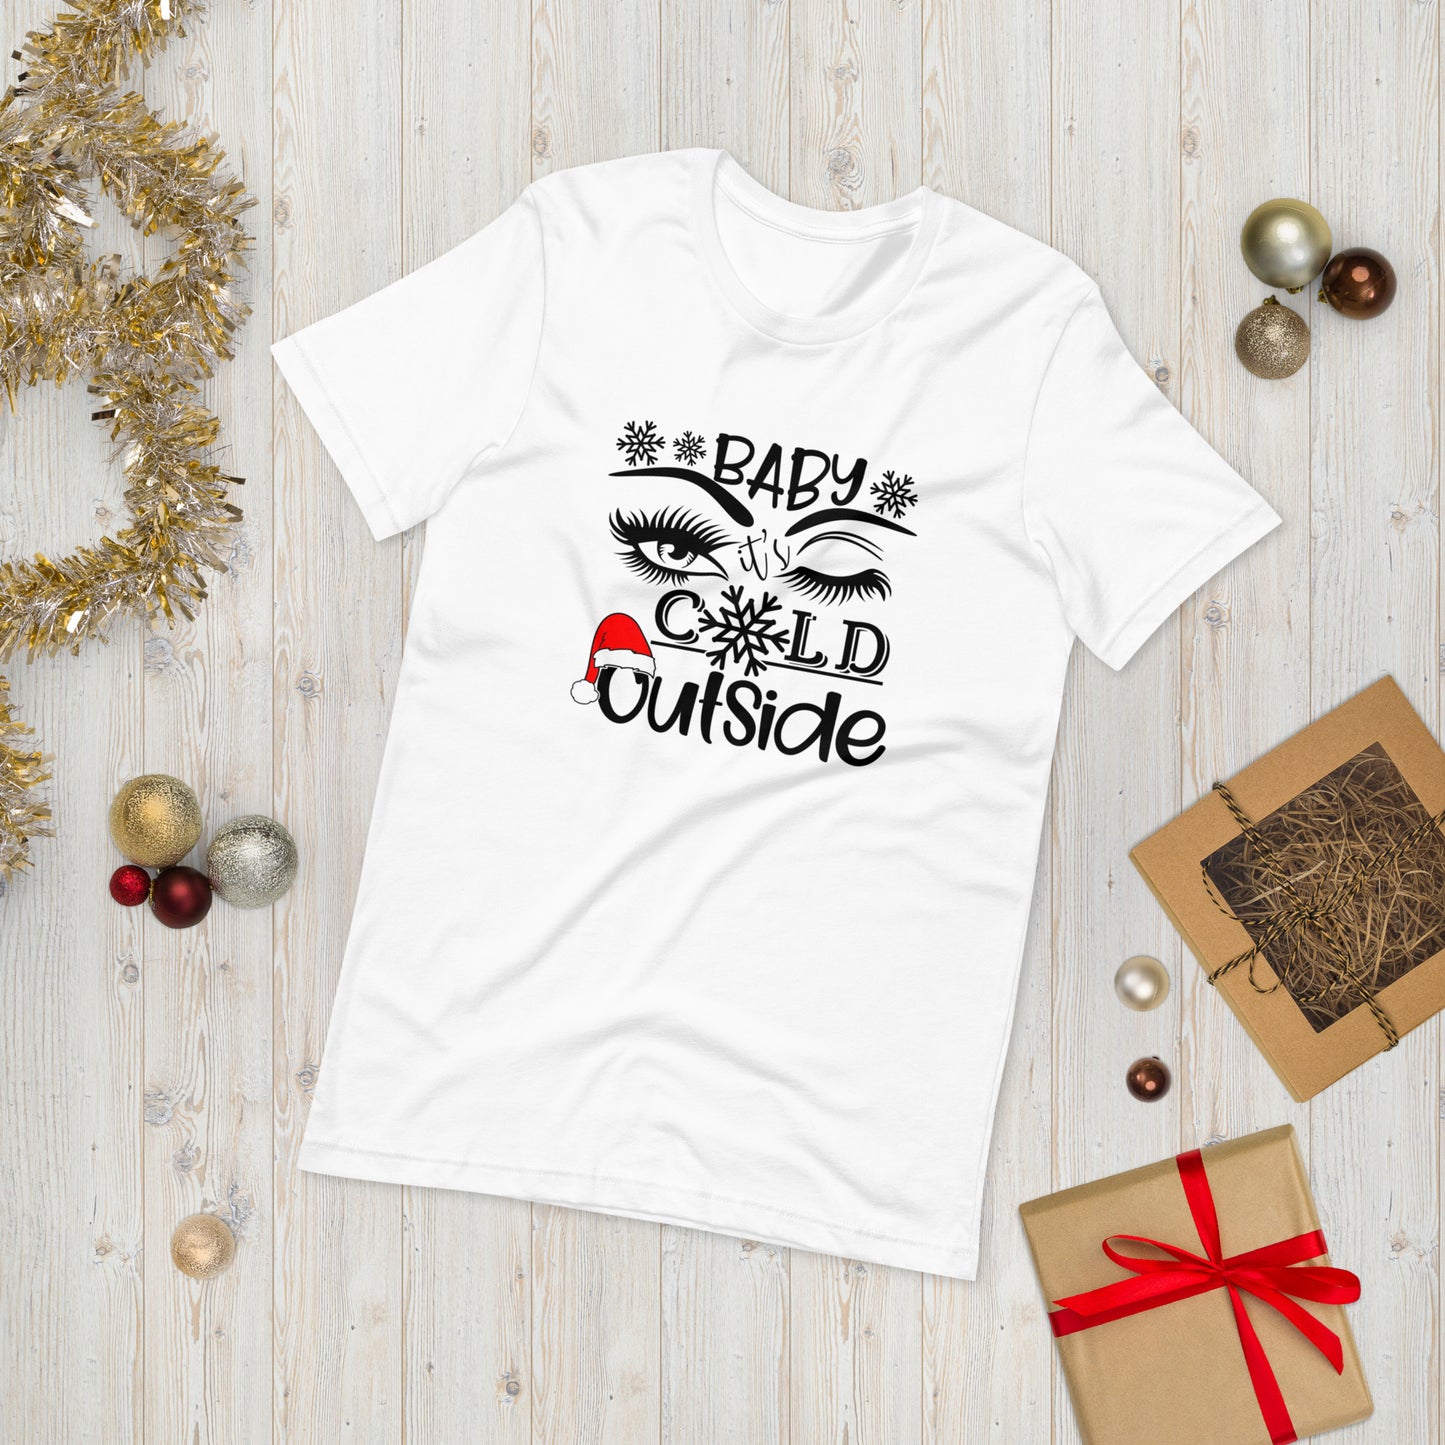 Baby It's Cold Outside Tshirt